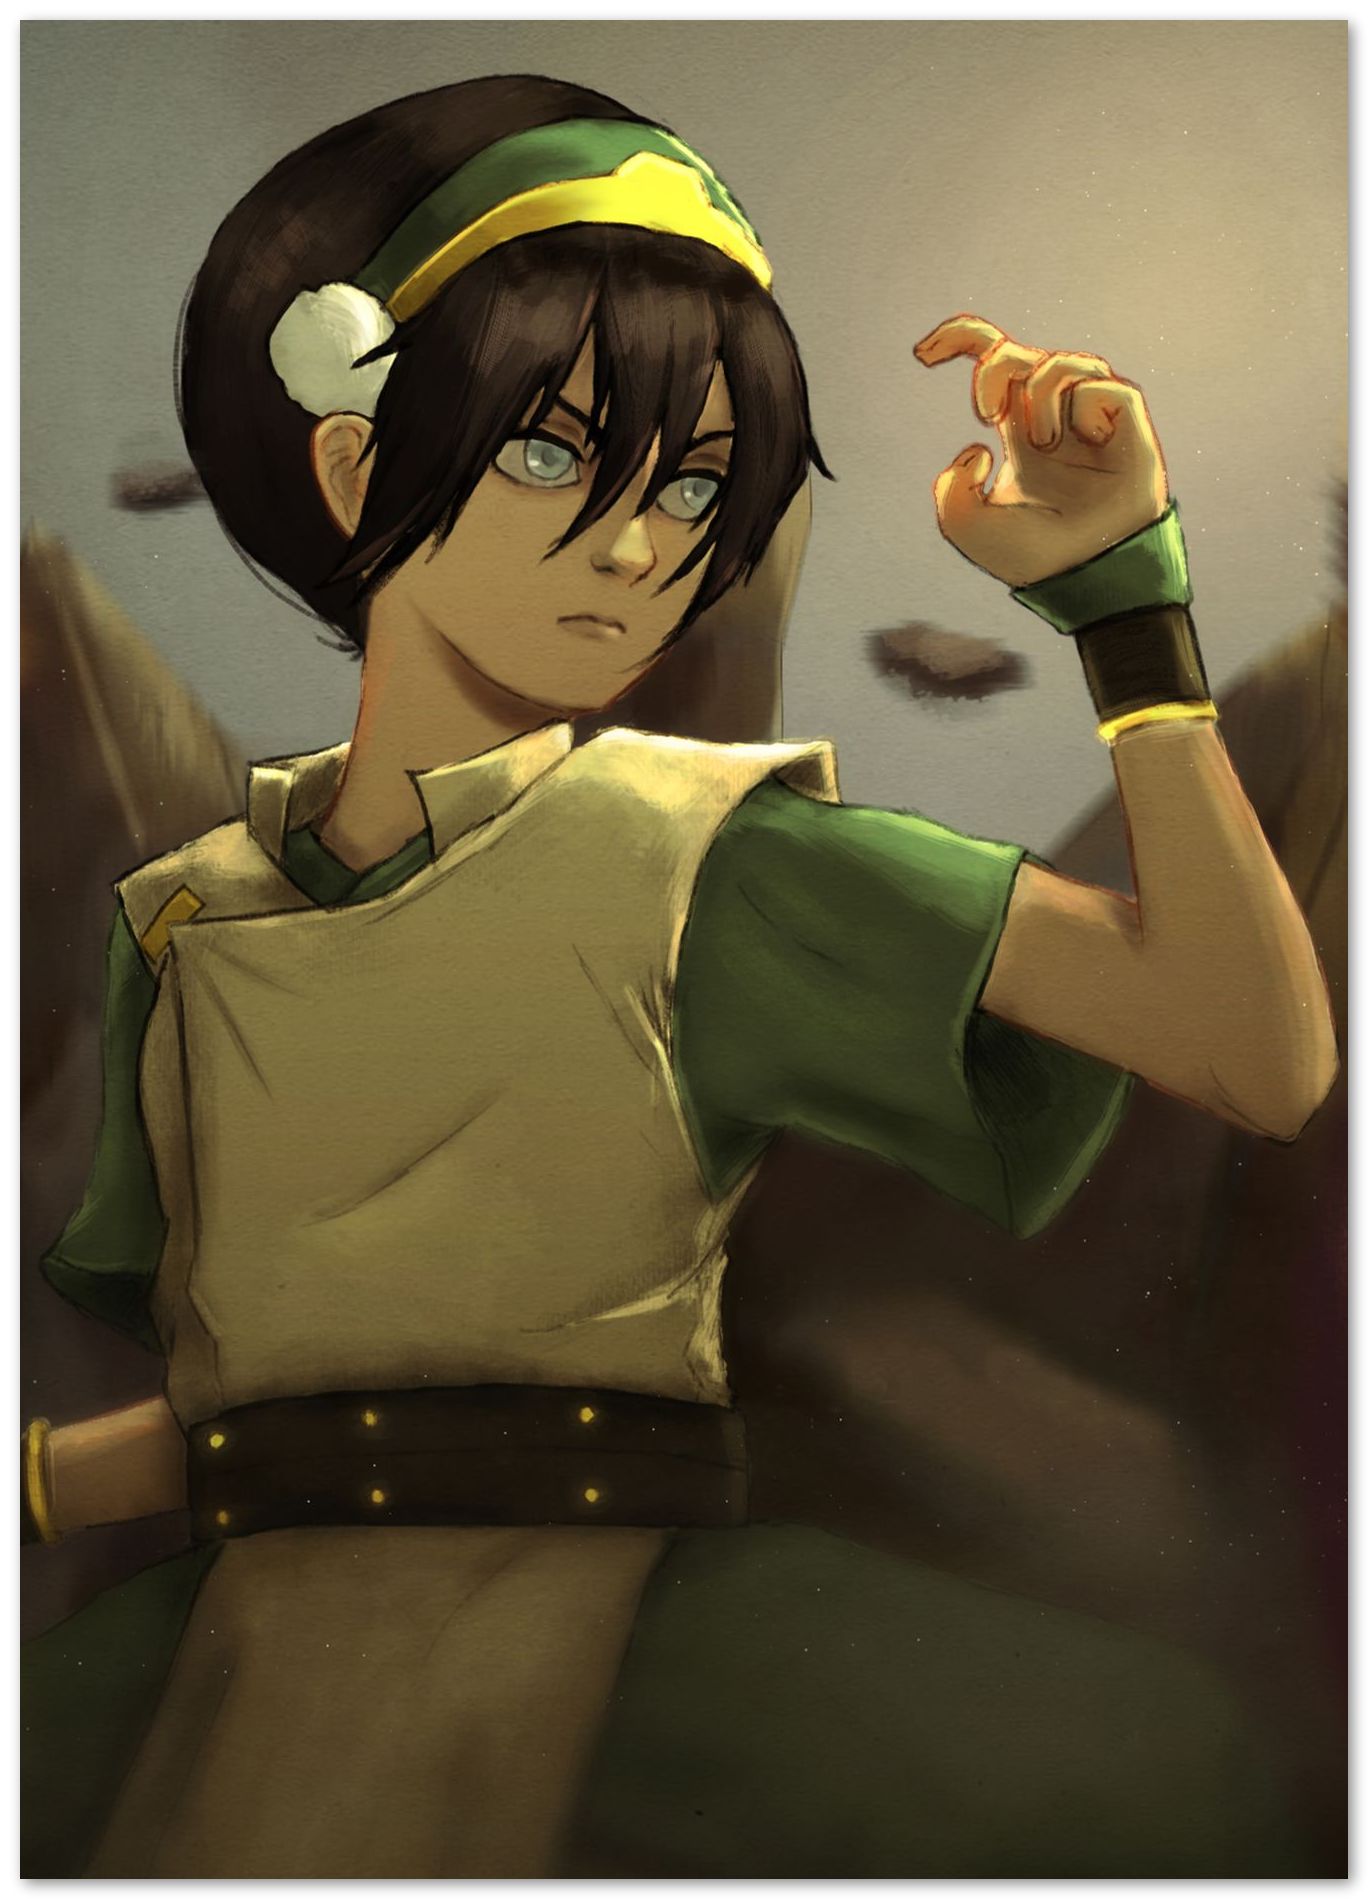 Toph - @LordCreative